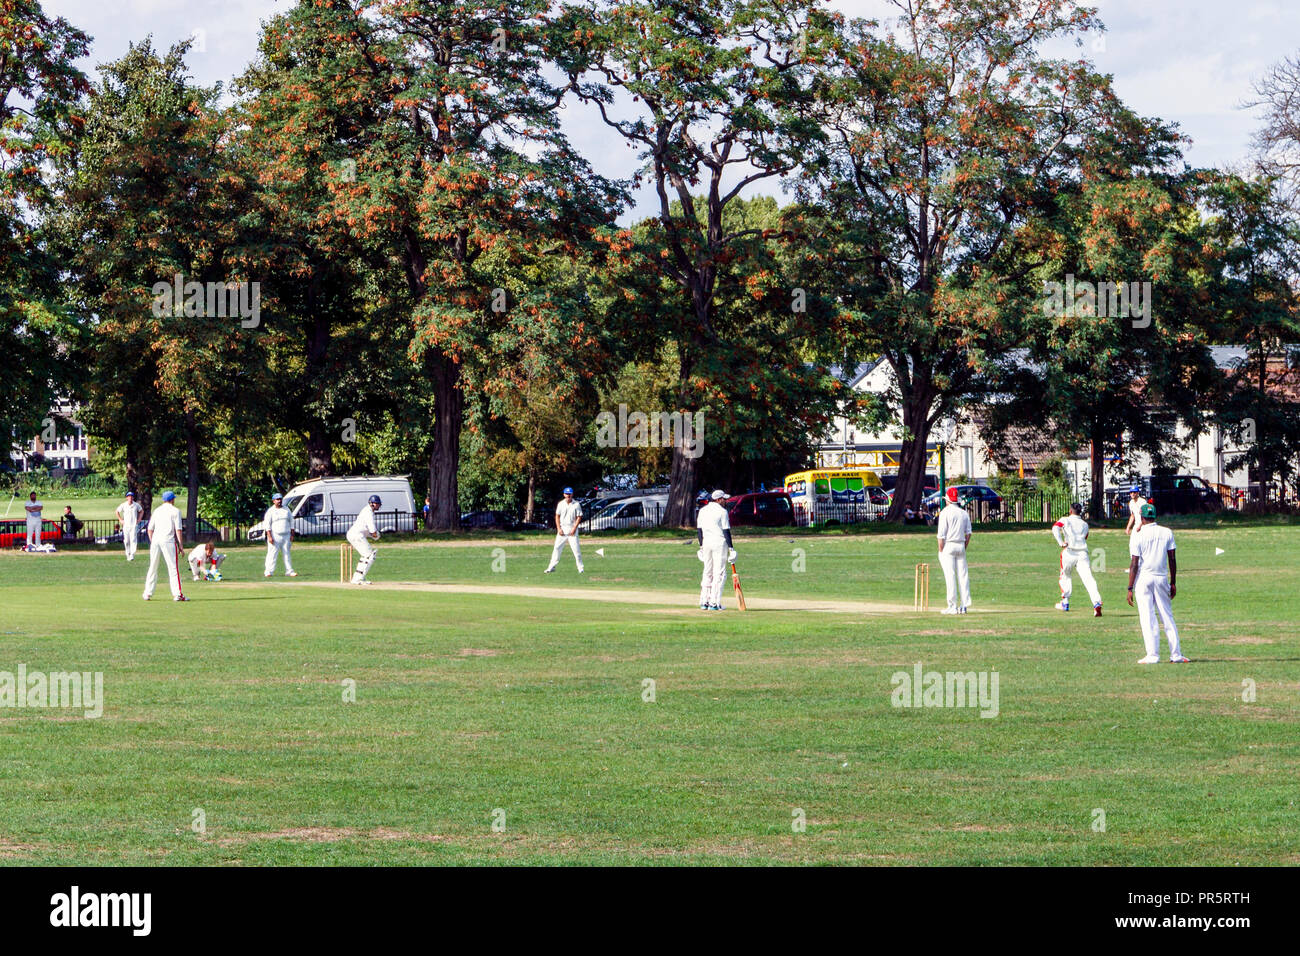 A Sunday cricket match in Springfield Park by the River Lea, London, UK Stock Photo